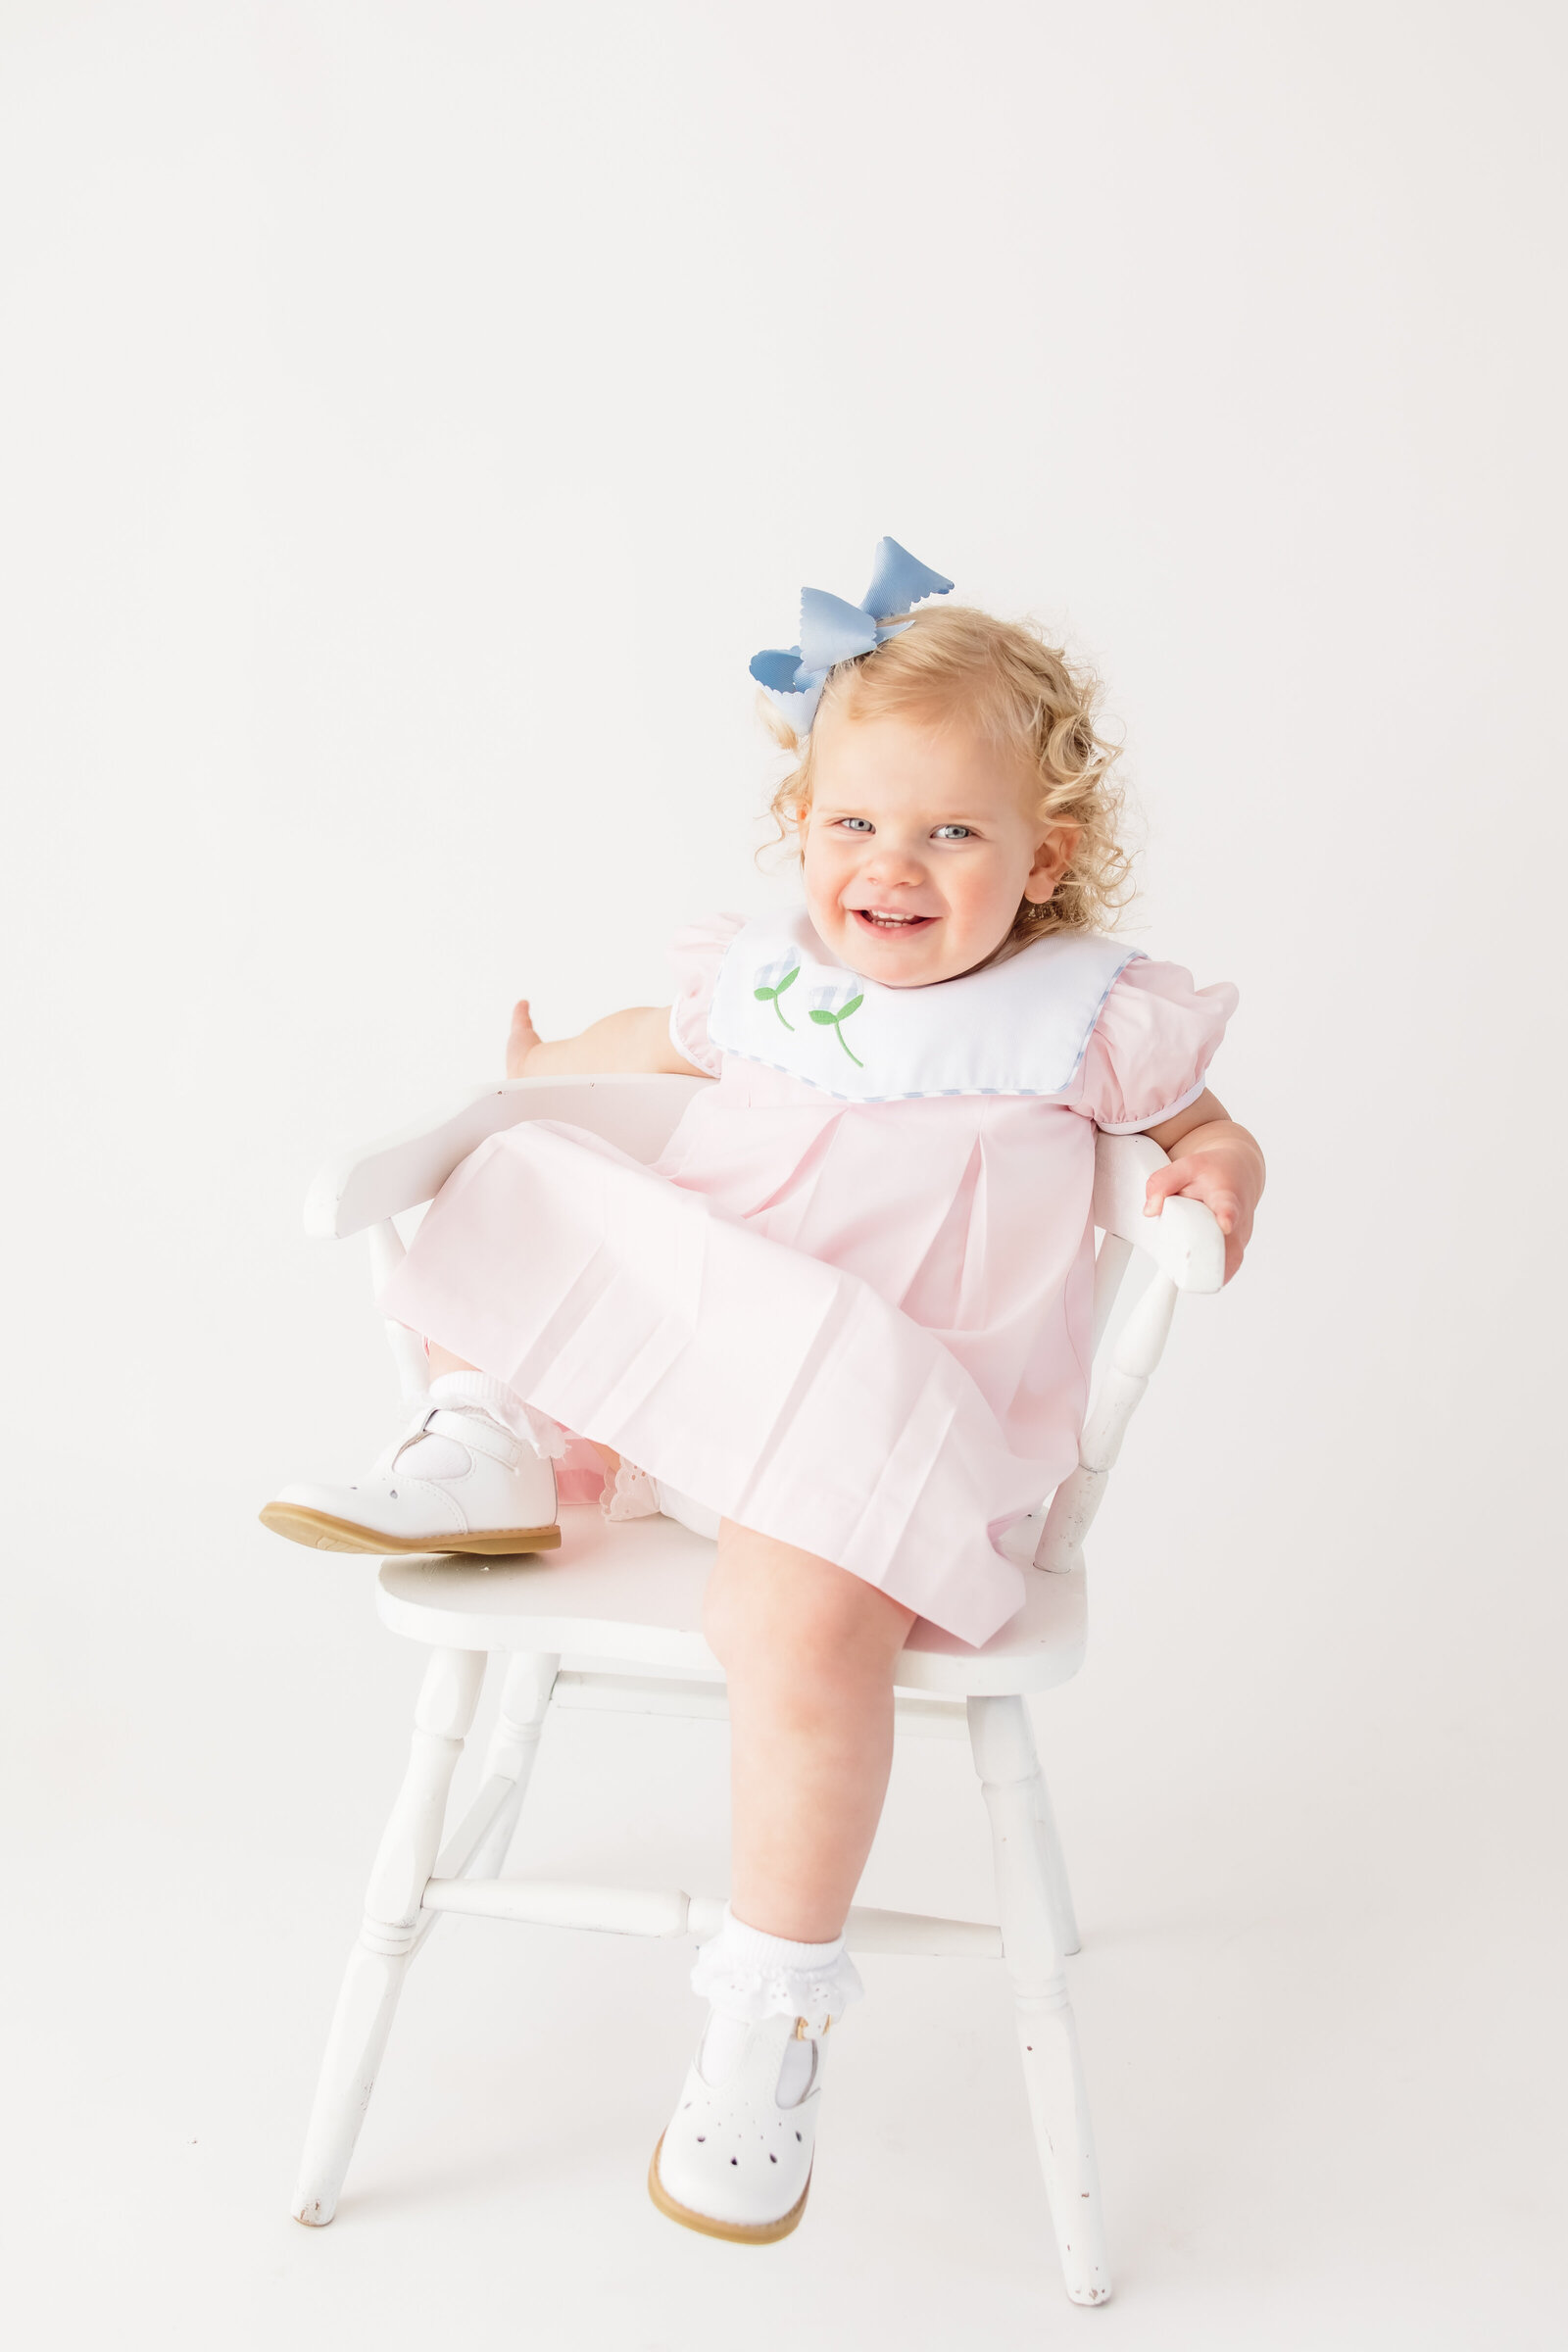 Little girl lounging on a white chair and smiling at the camera